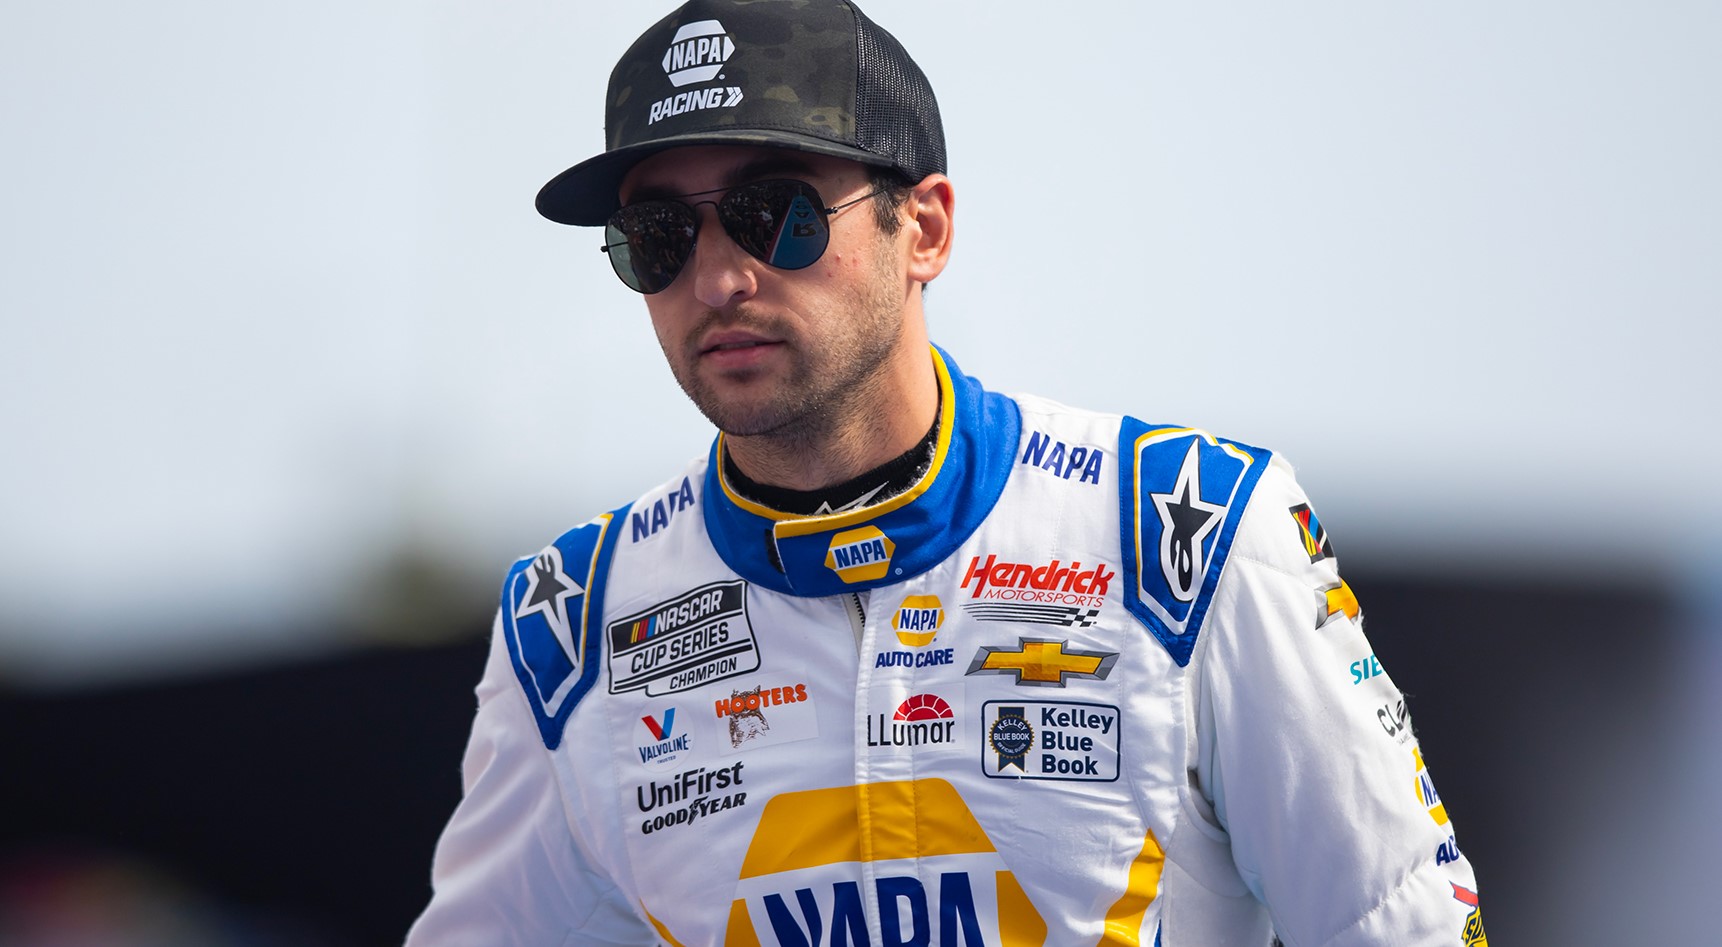 Chase Elliott makes a comeback to NASCAR racing